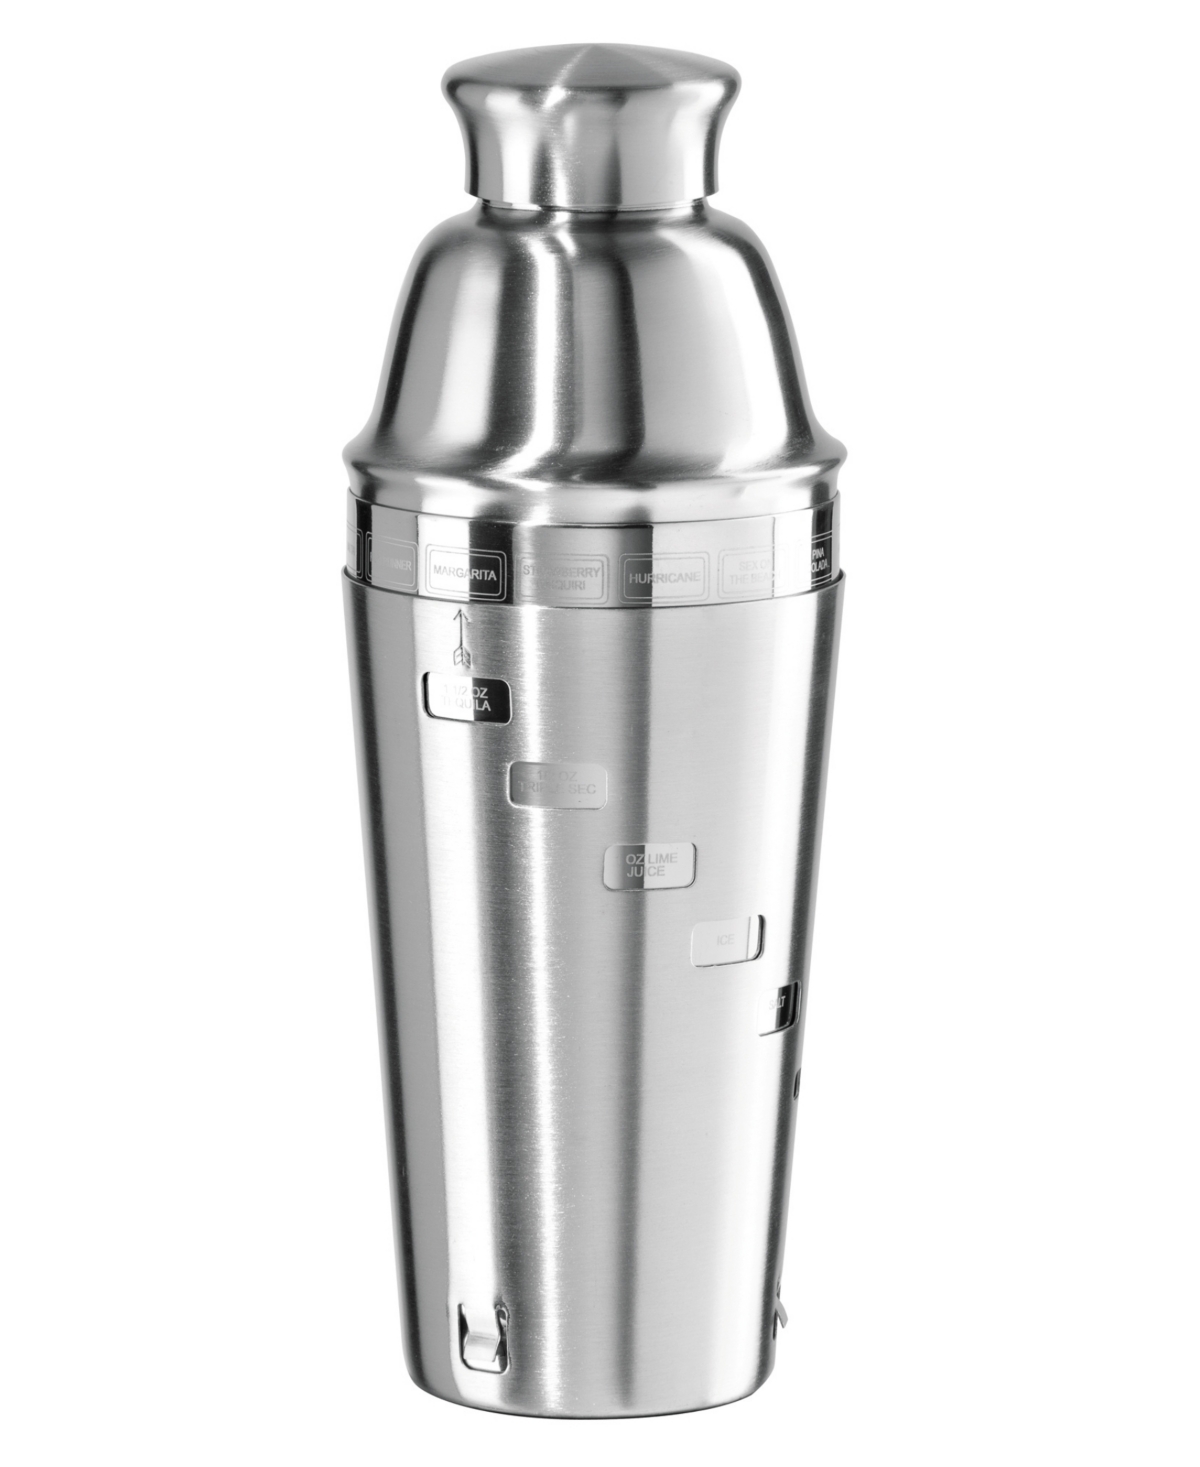 Oggi 1 Litre Dial-a-drink Cocktail Shaker In Stainless Steel